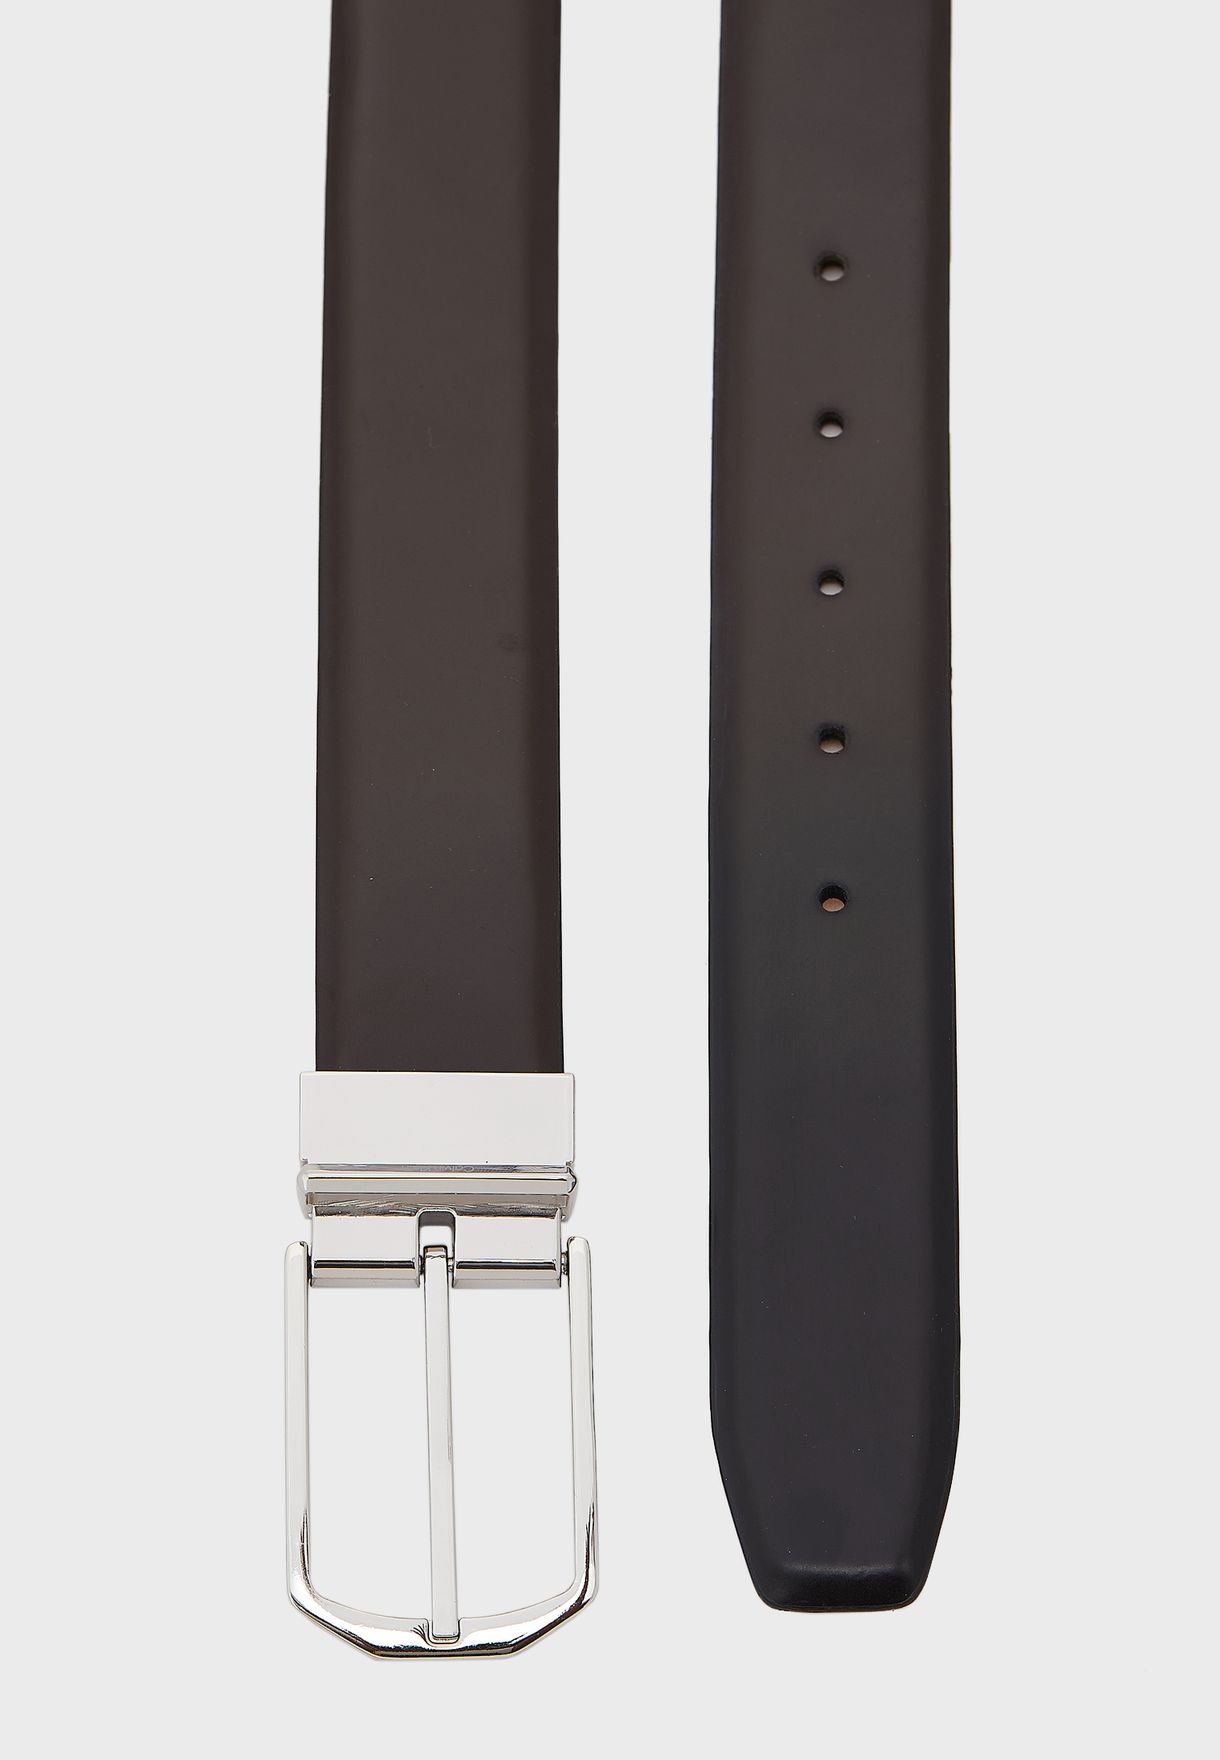 Square Buckle Allocated Hole Belt